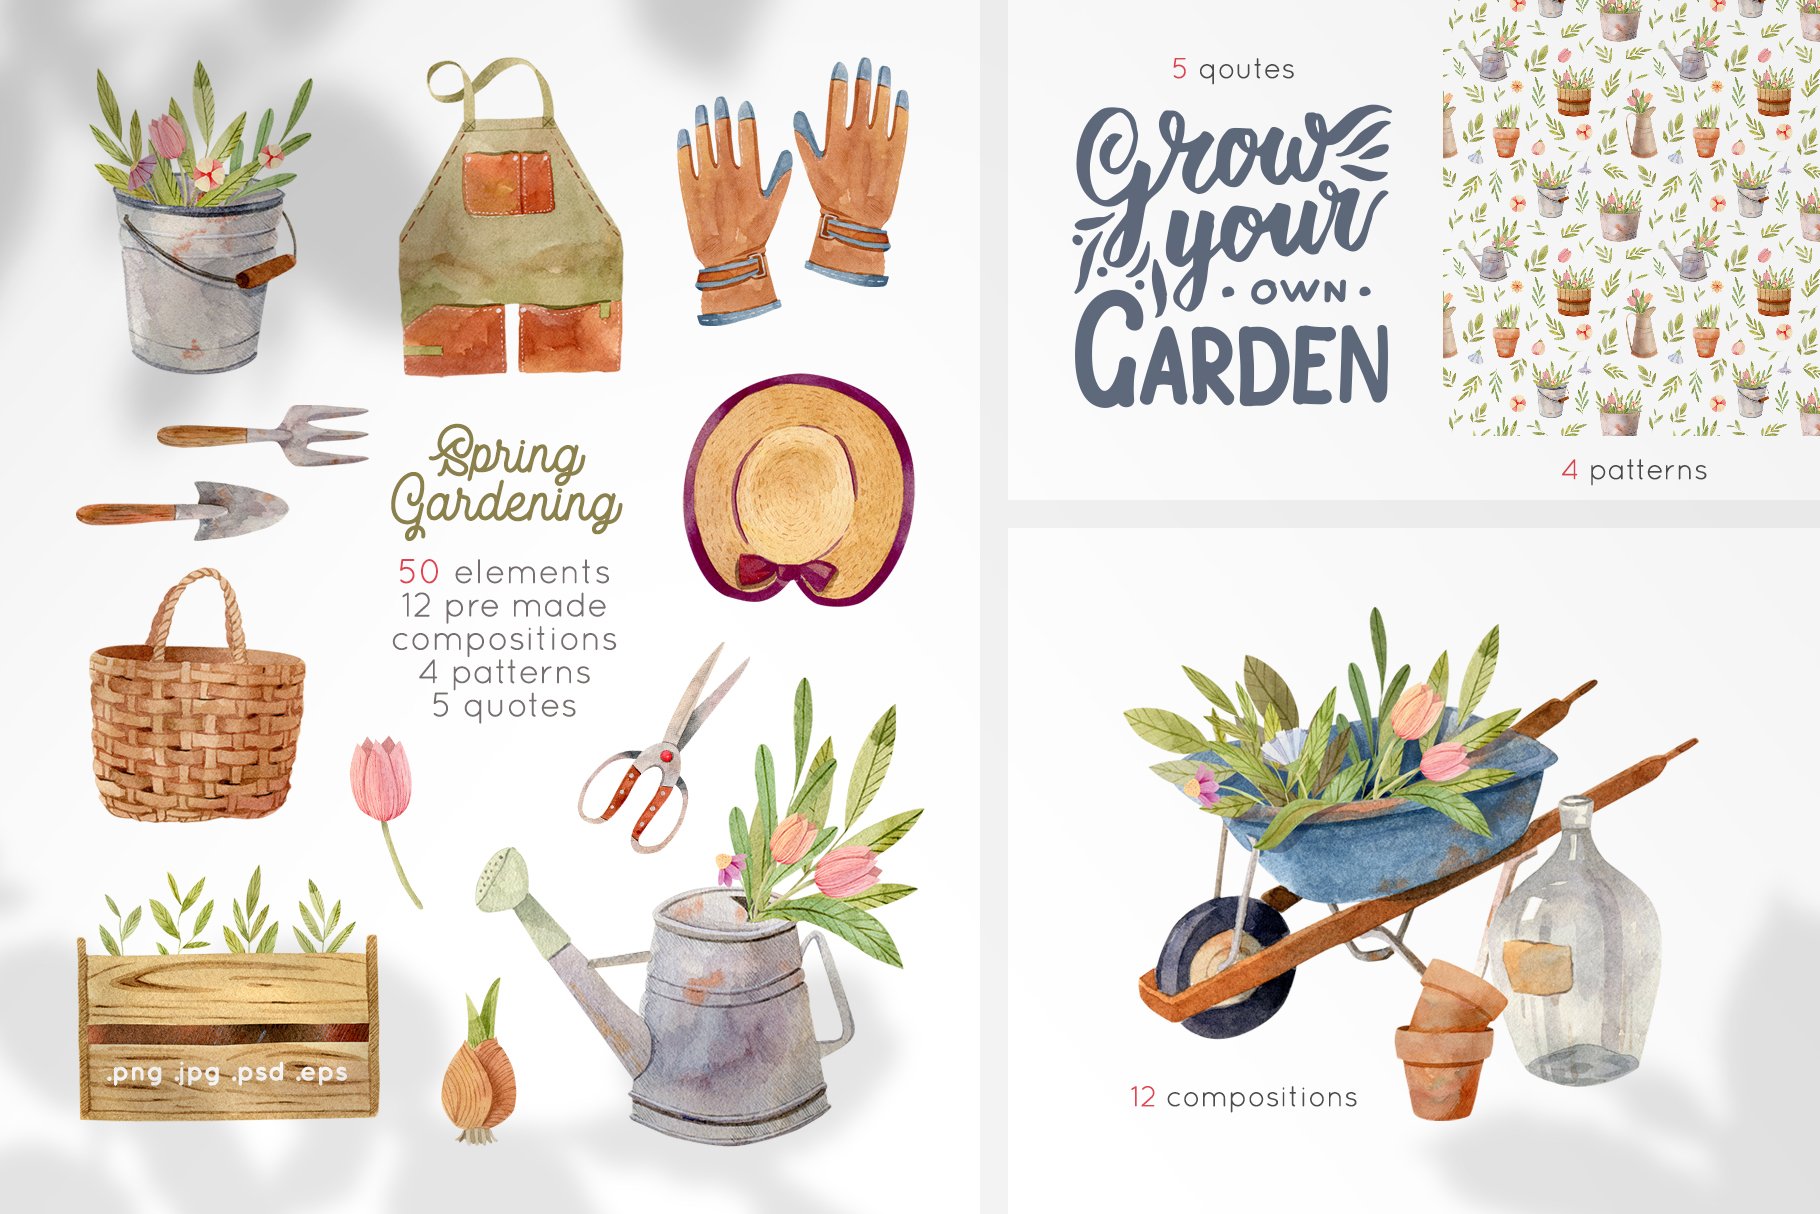 Gardening Tools Clipart cover image.